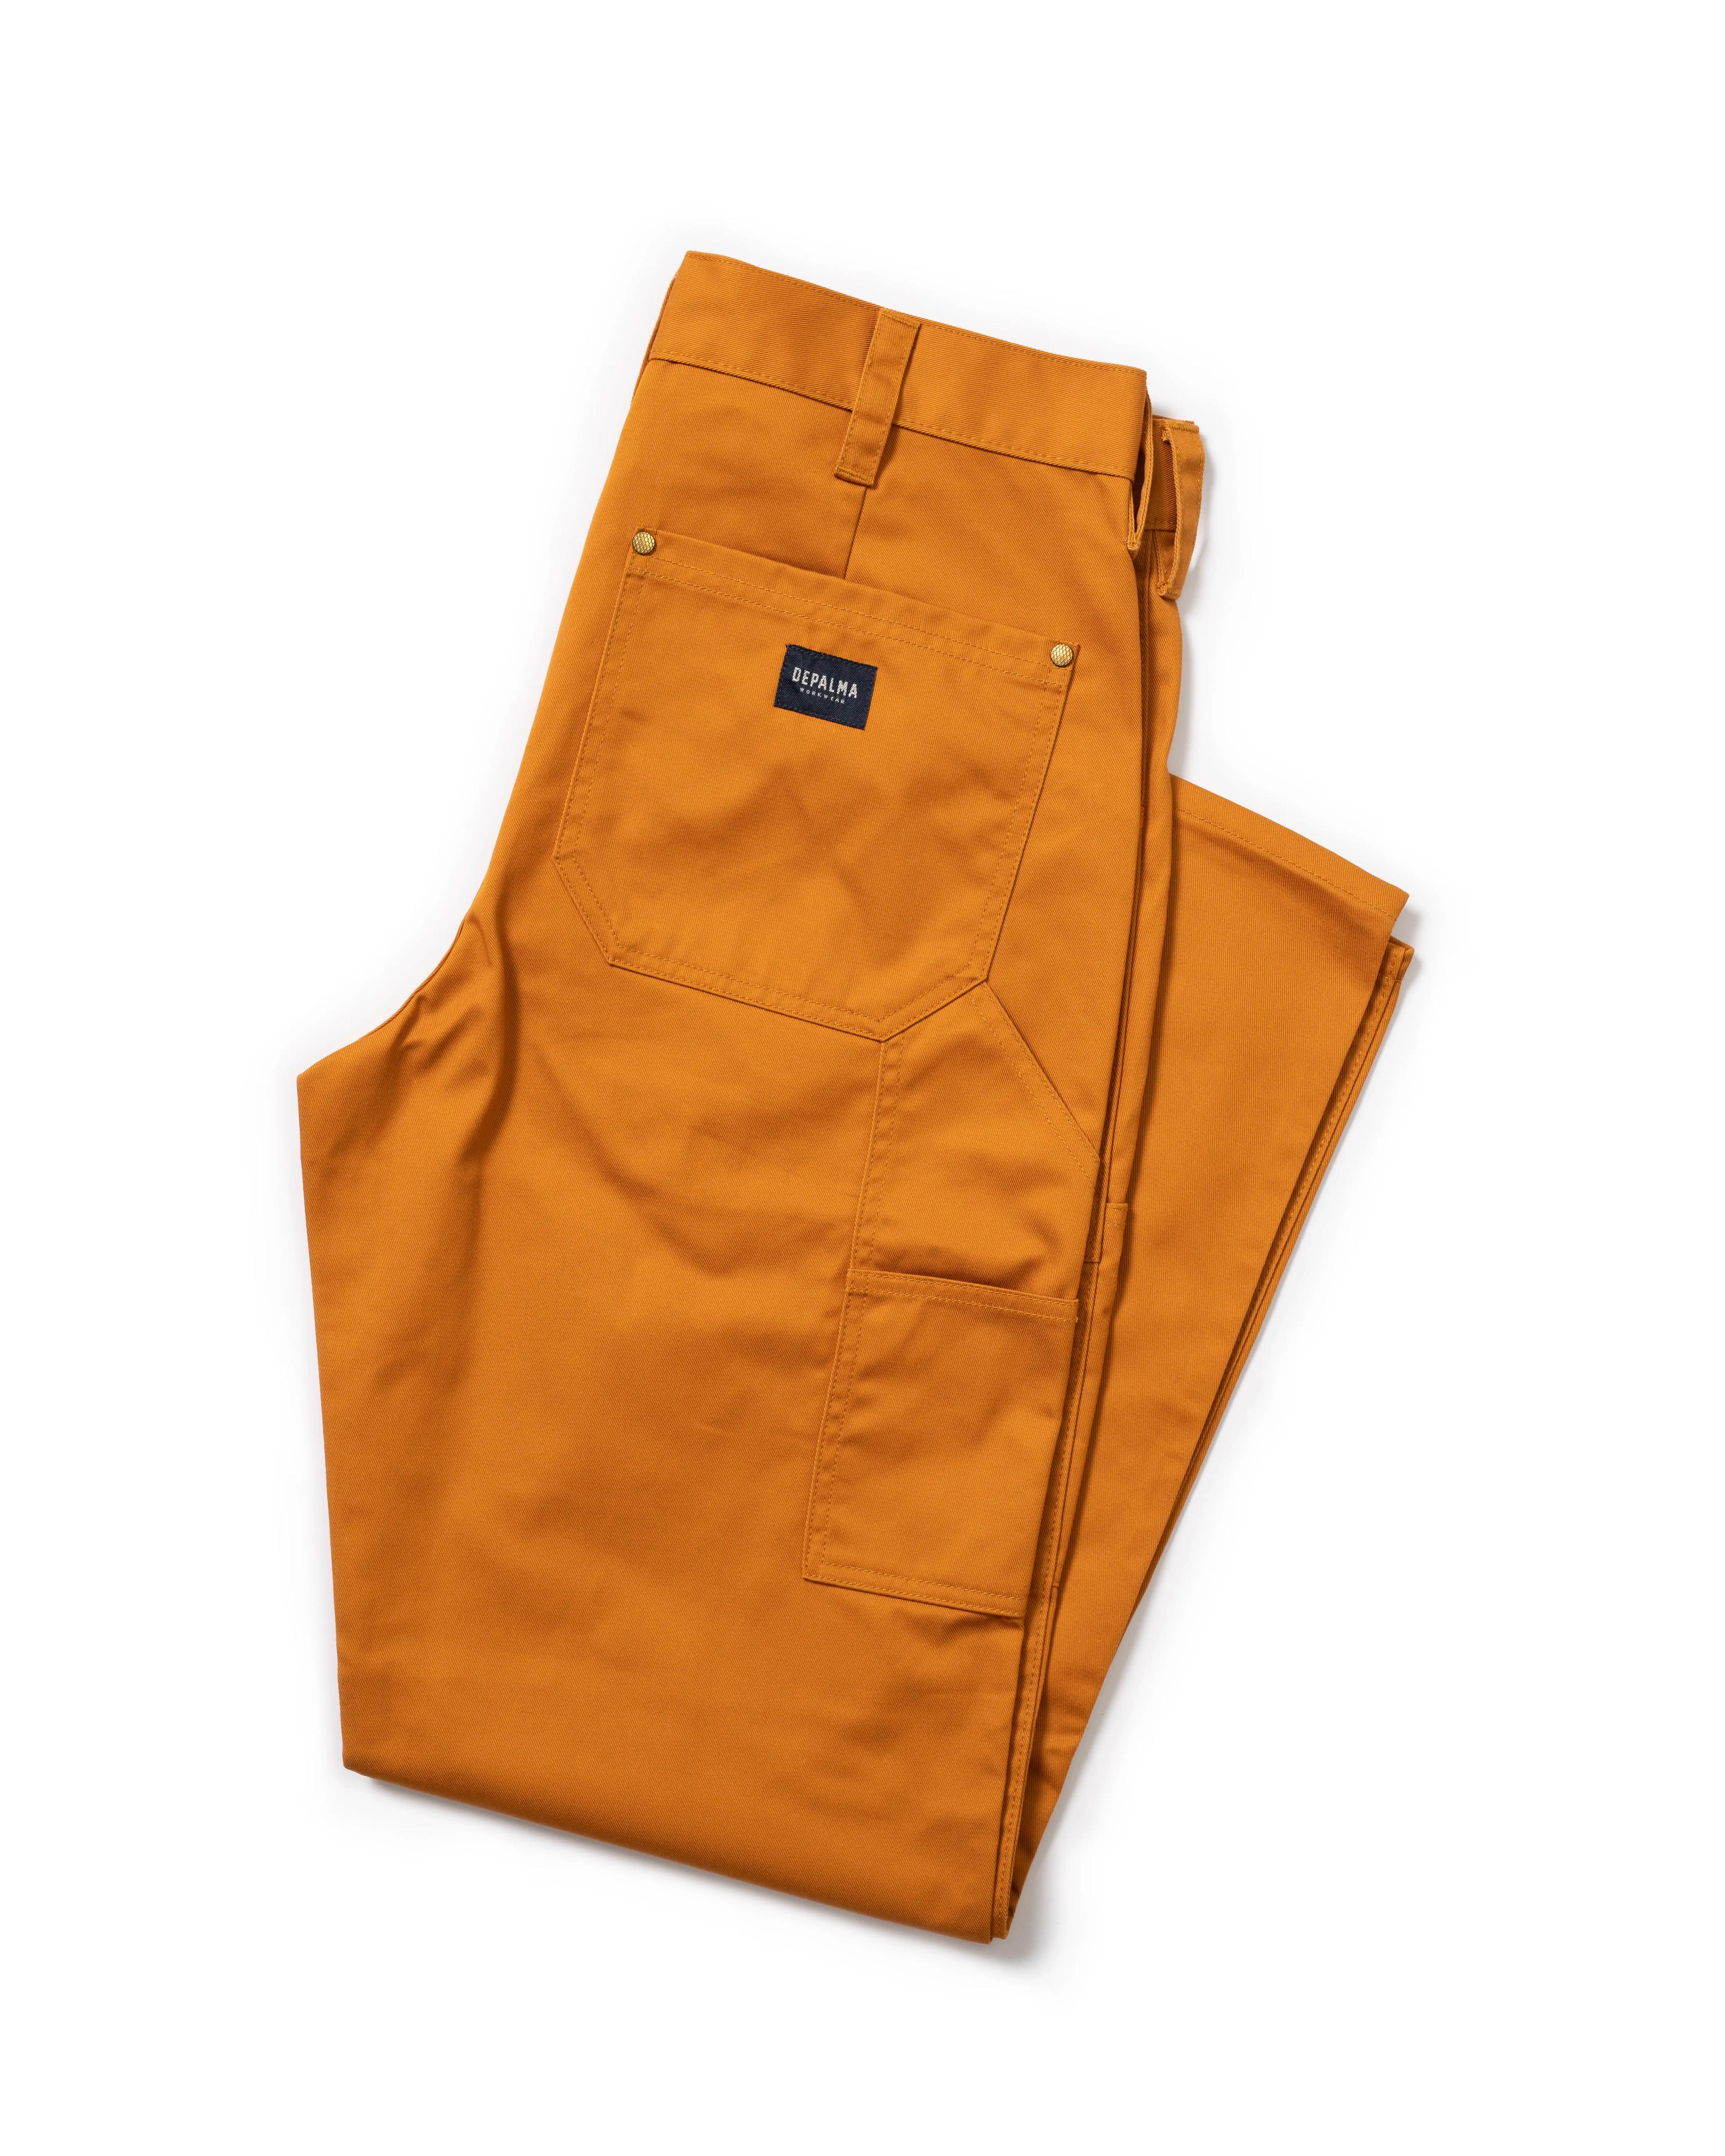 Photo of Hines Service Pants, Tobacco